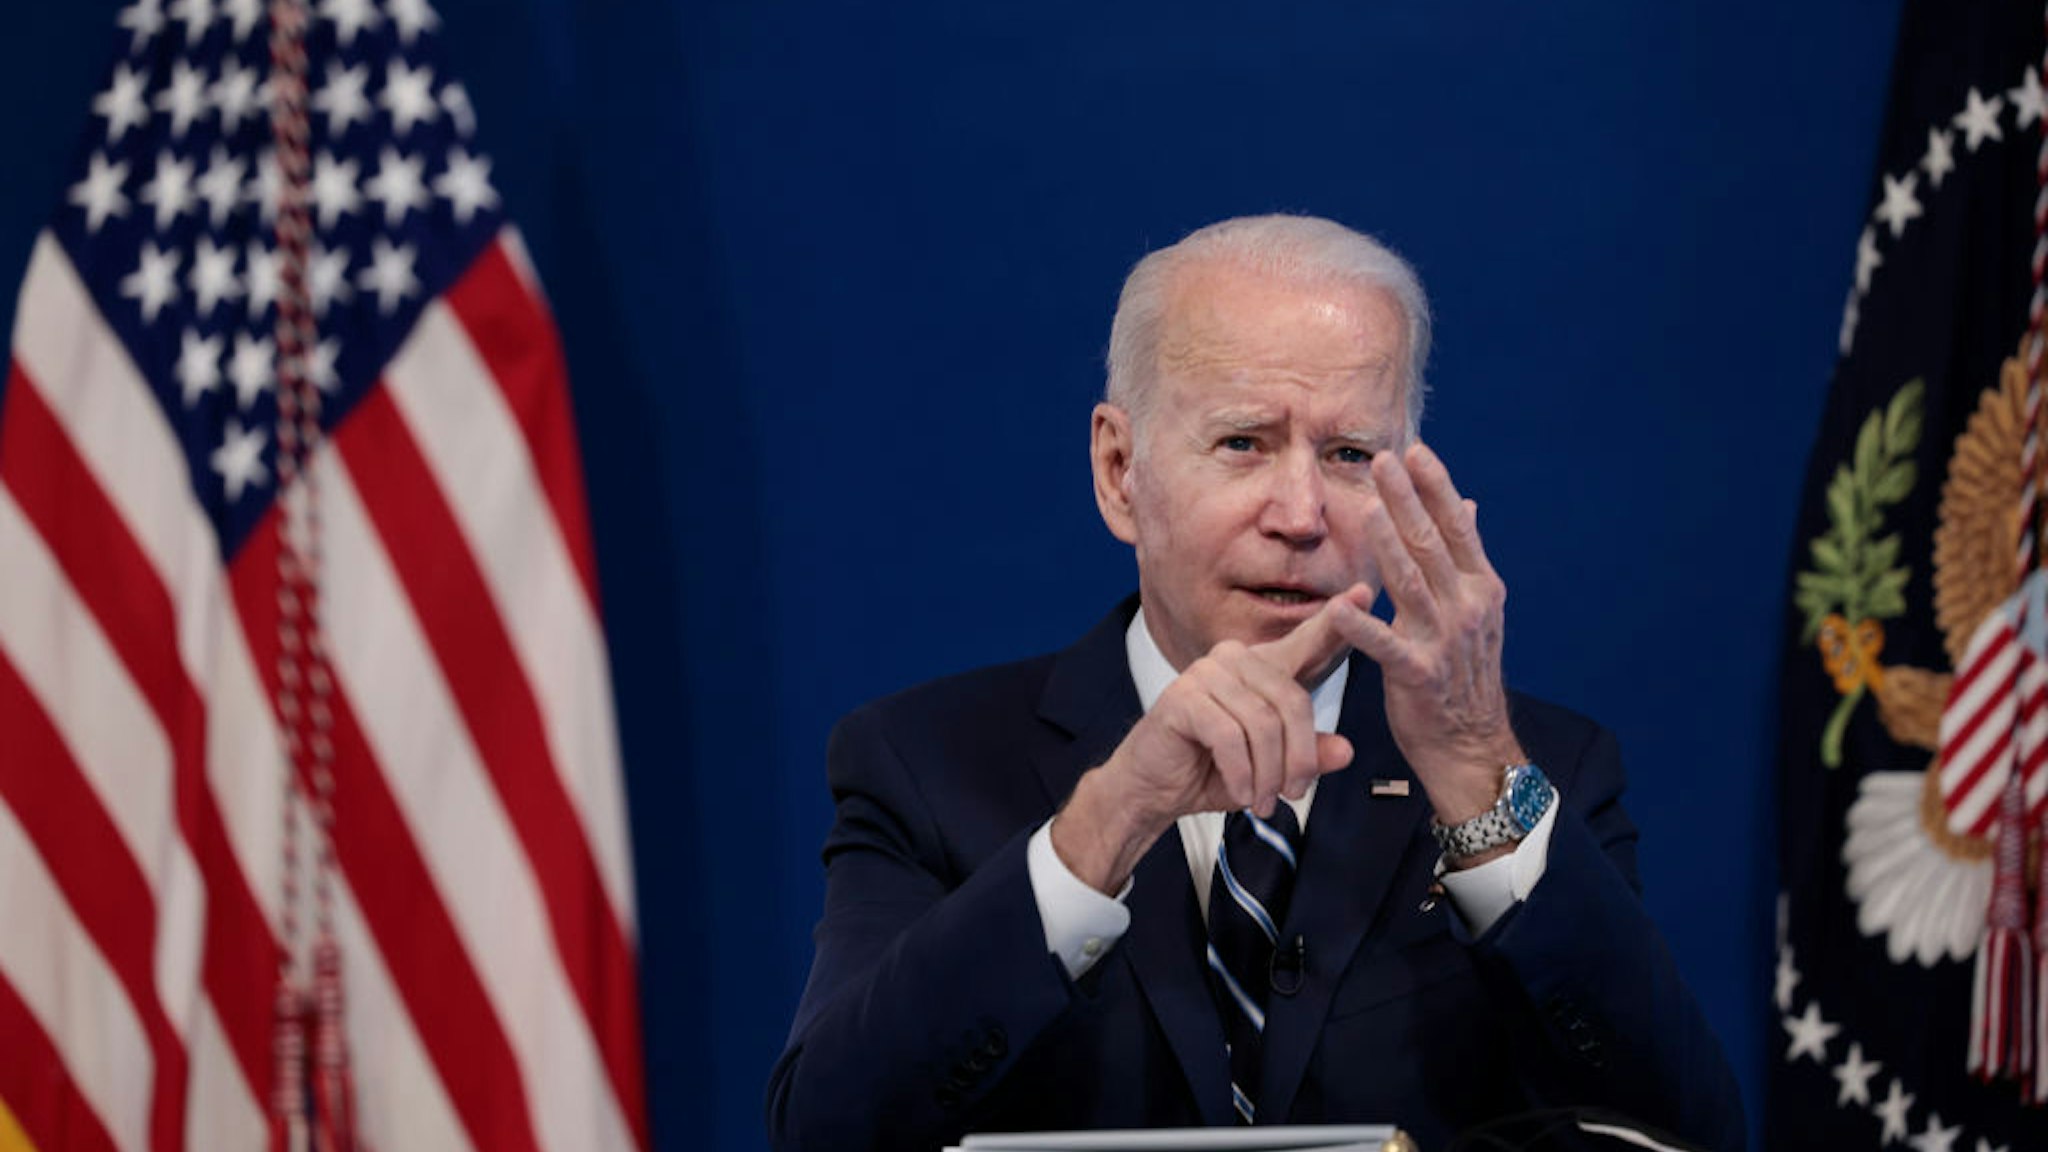 WASHINGTON, DC - JANUARY 13: U.S. President Joe Biden gestures as he gives remarks on his administration's response to the surge in COVID-19 cases across the country from the South Court Auditorium in the Eisenhower Executive Office Building on January 13, 2022 in Washington, DC. During the remarks President Biden urged unvaccinated individuals to seek the vaccine and highlighted his plan to distribute free COVID-19 tests and masks to the American people. (Photo by Anna Moneymaker/Getty Images)